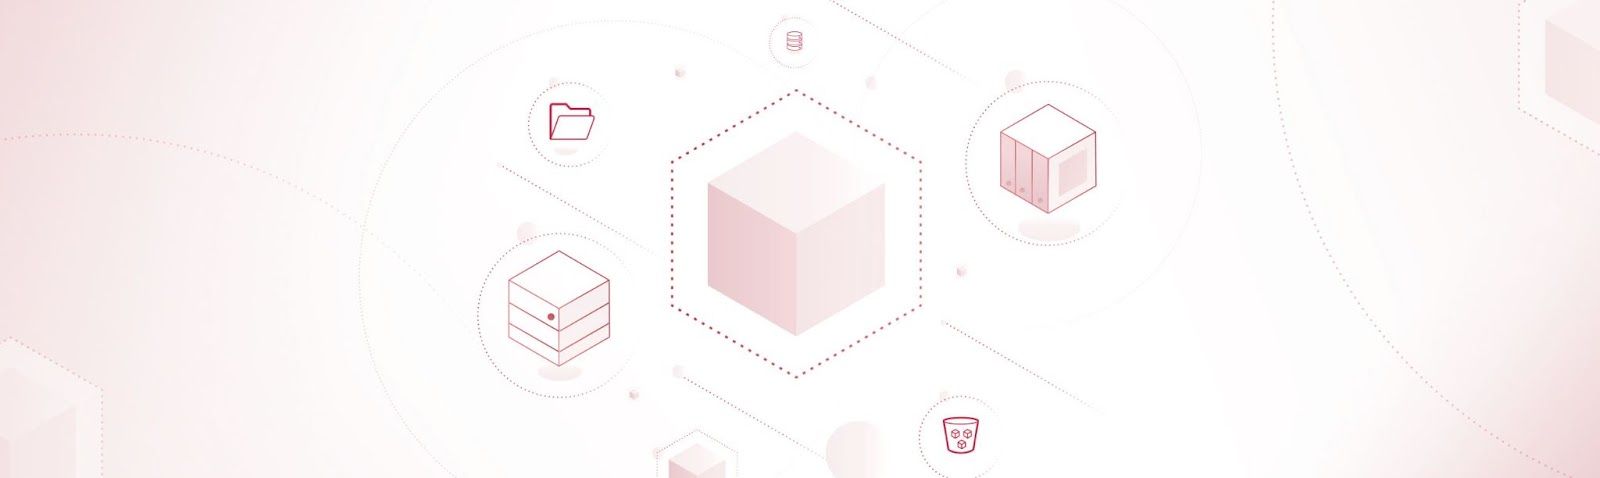 The Architect’s Guide to Storage for AI